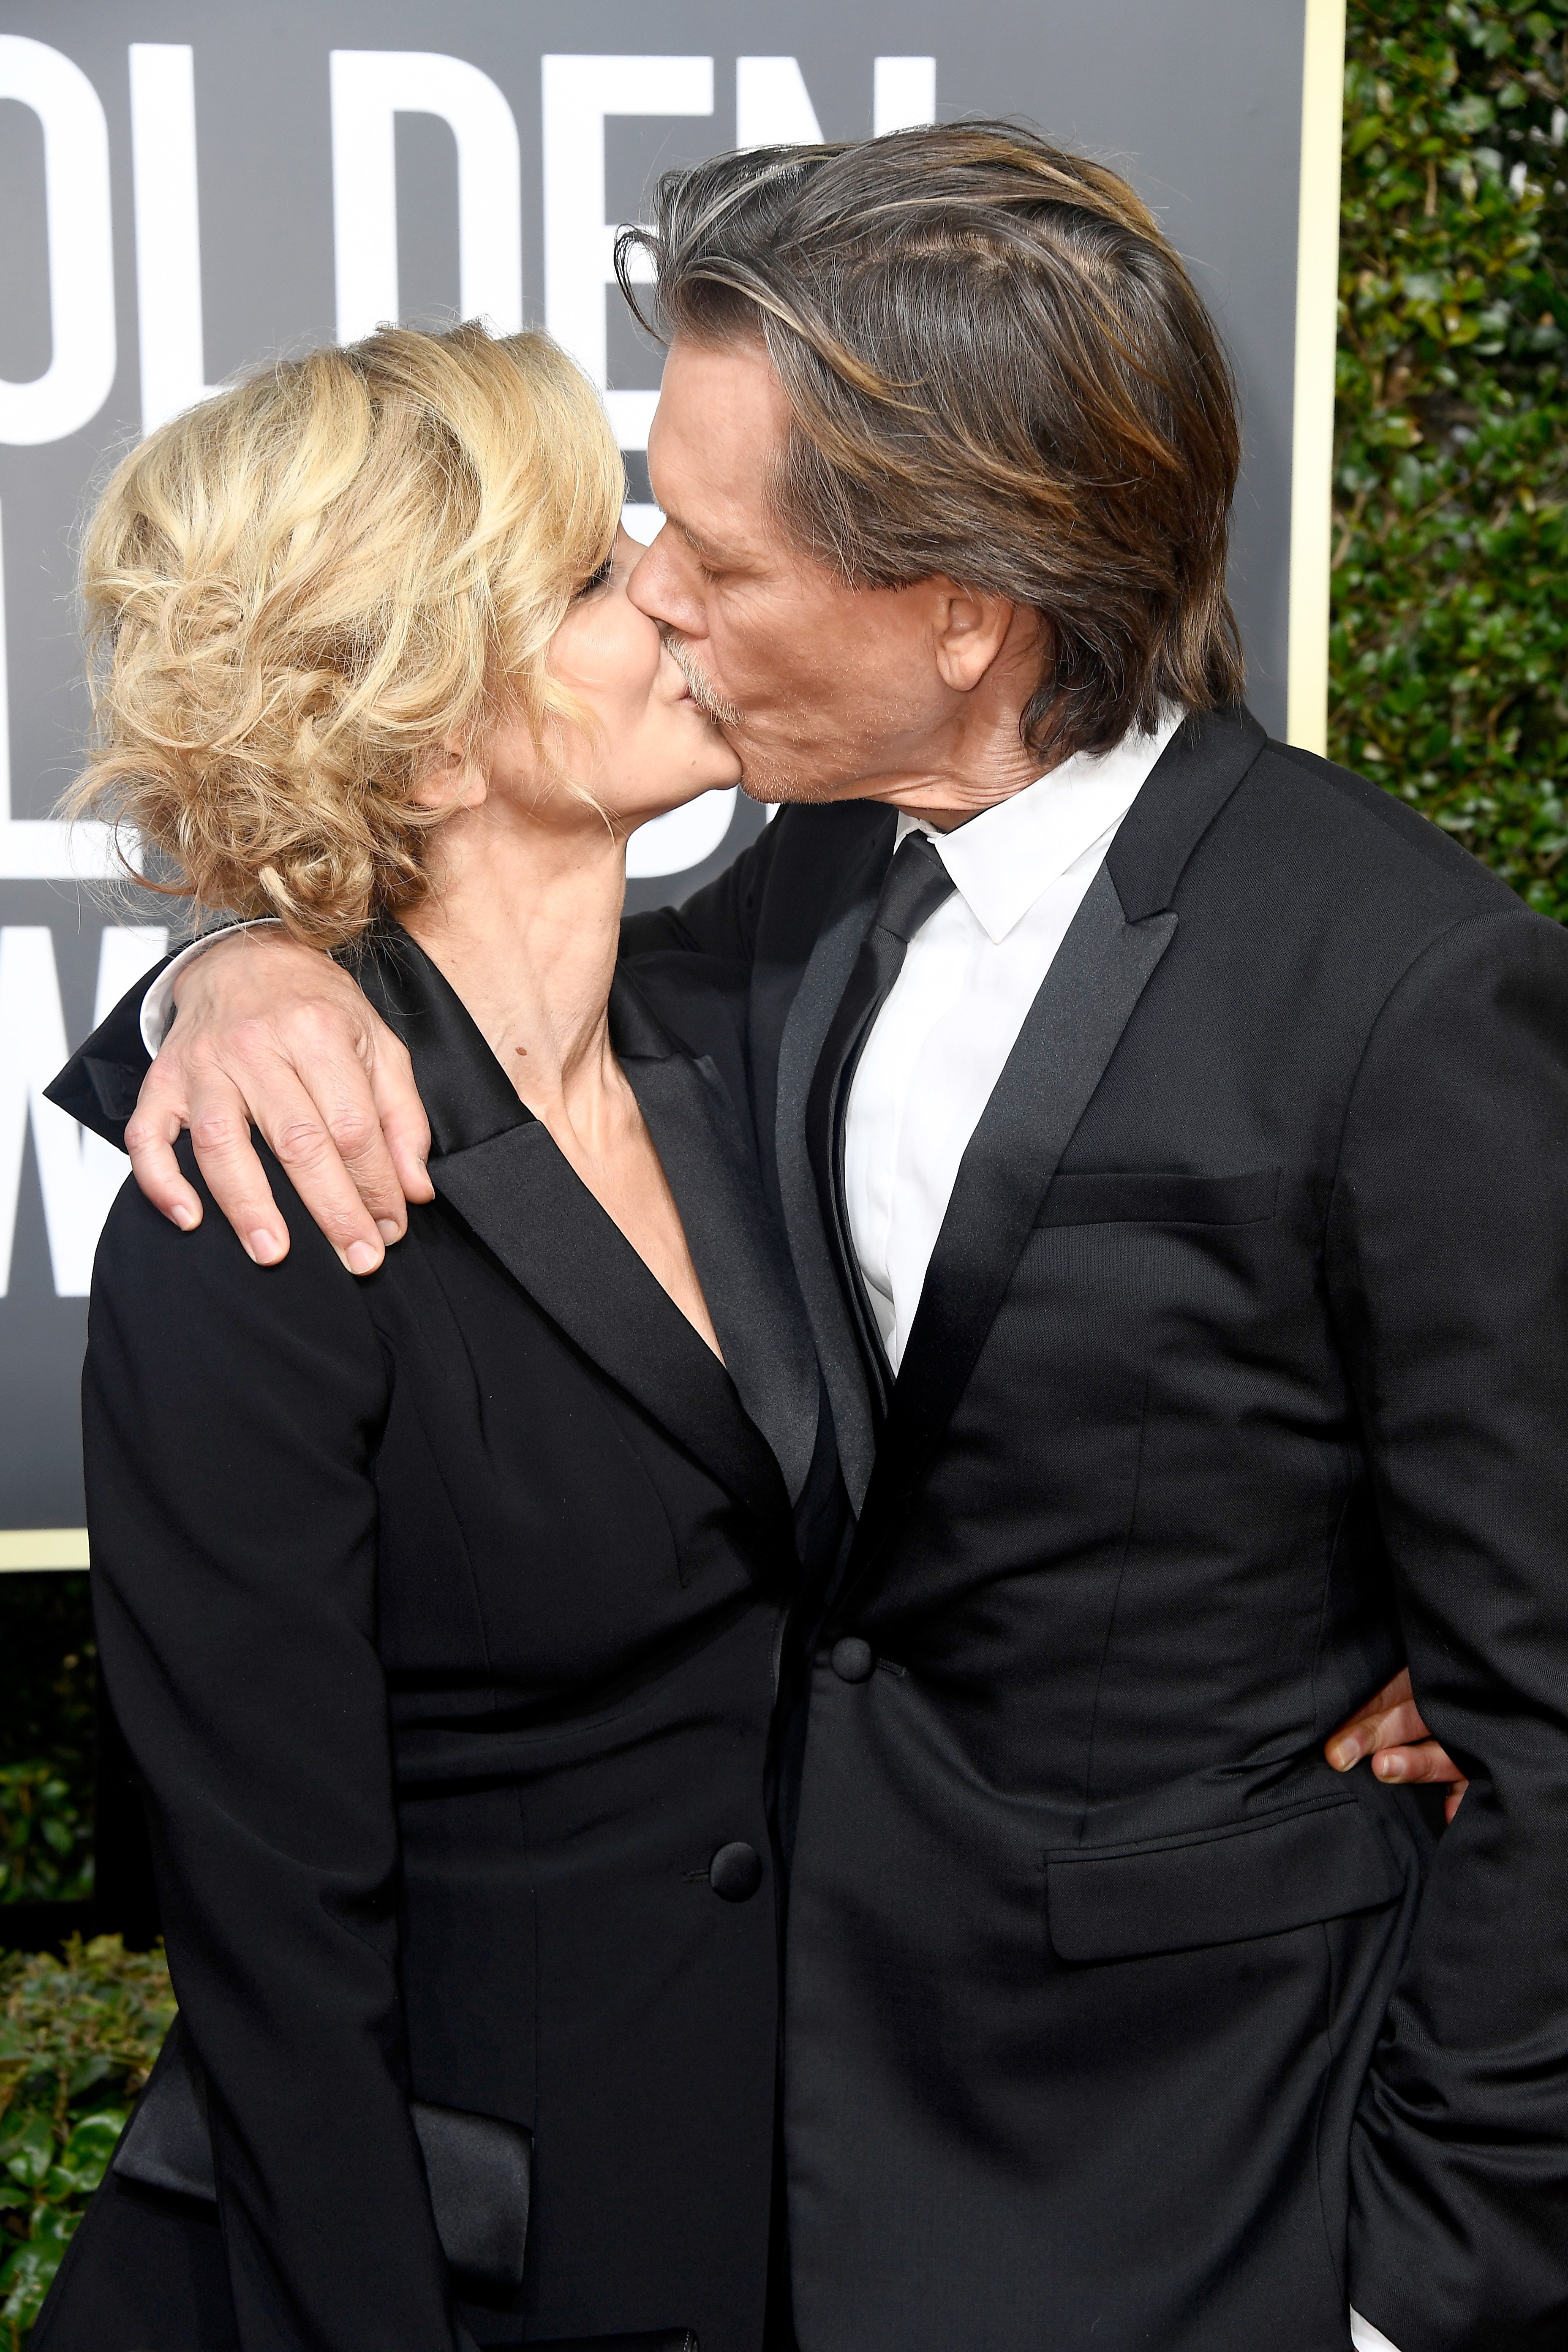 Kyra Sedgwick and Kevin Bacon attend the 75th Annual Golden Globe Awards in Beverly Hills, California on January 7, 2018 | Photo: Getty Images